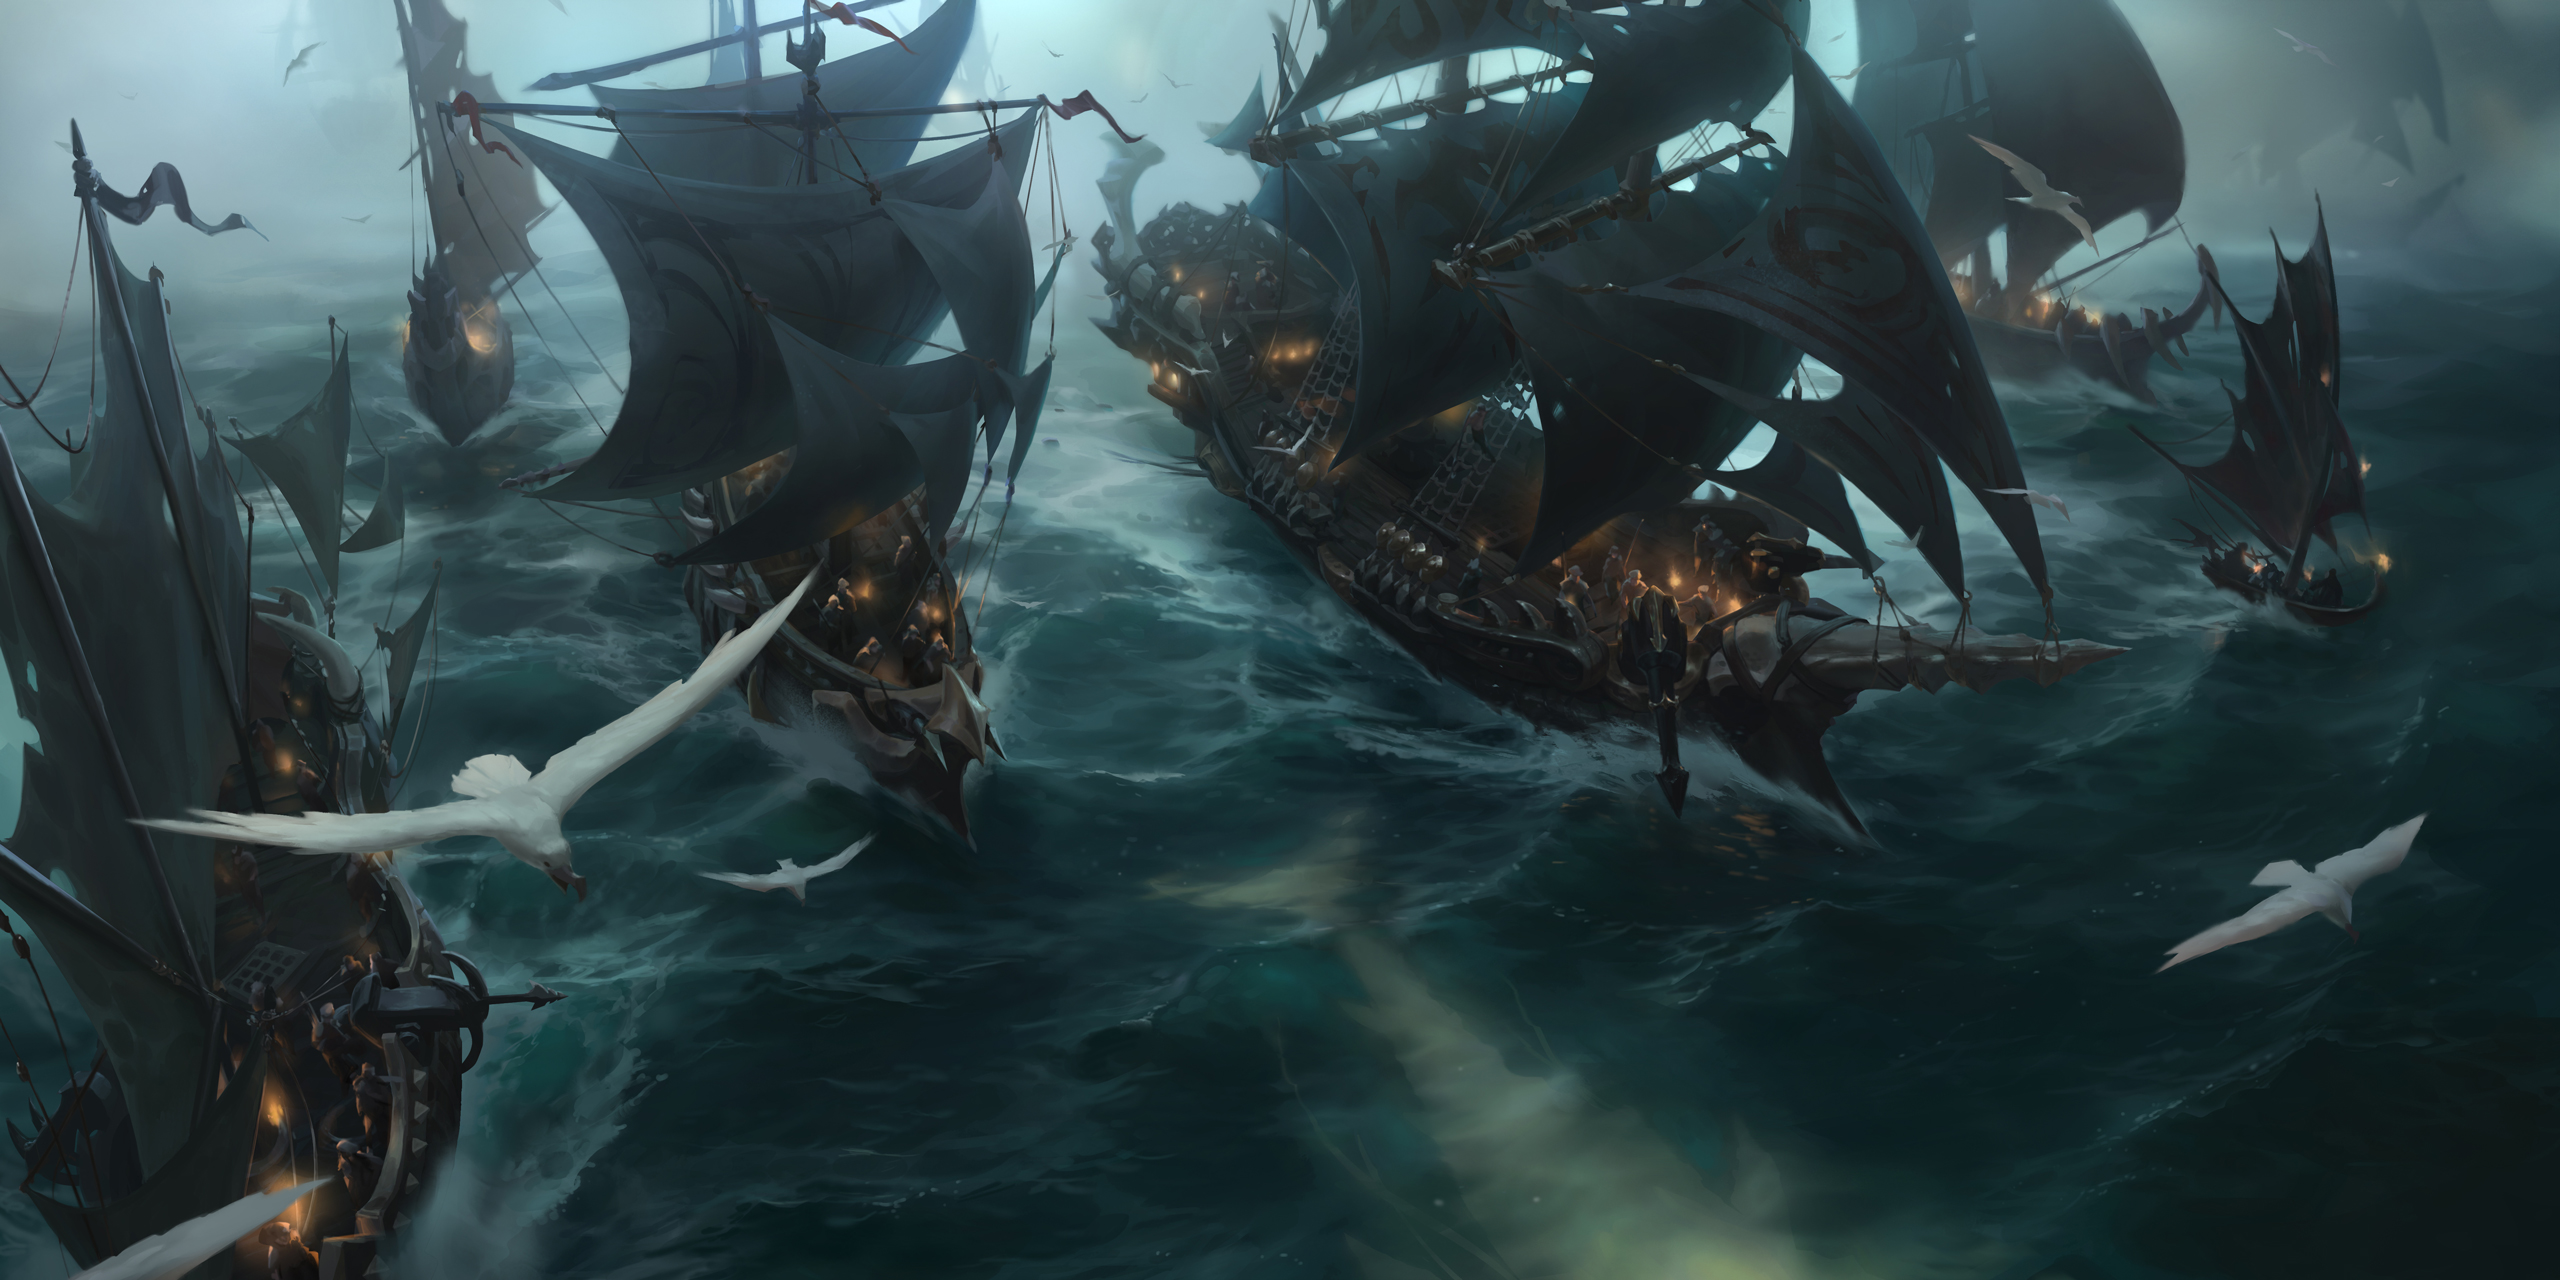 Hunting Fleet by Will Gist